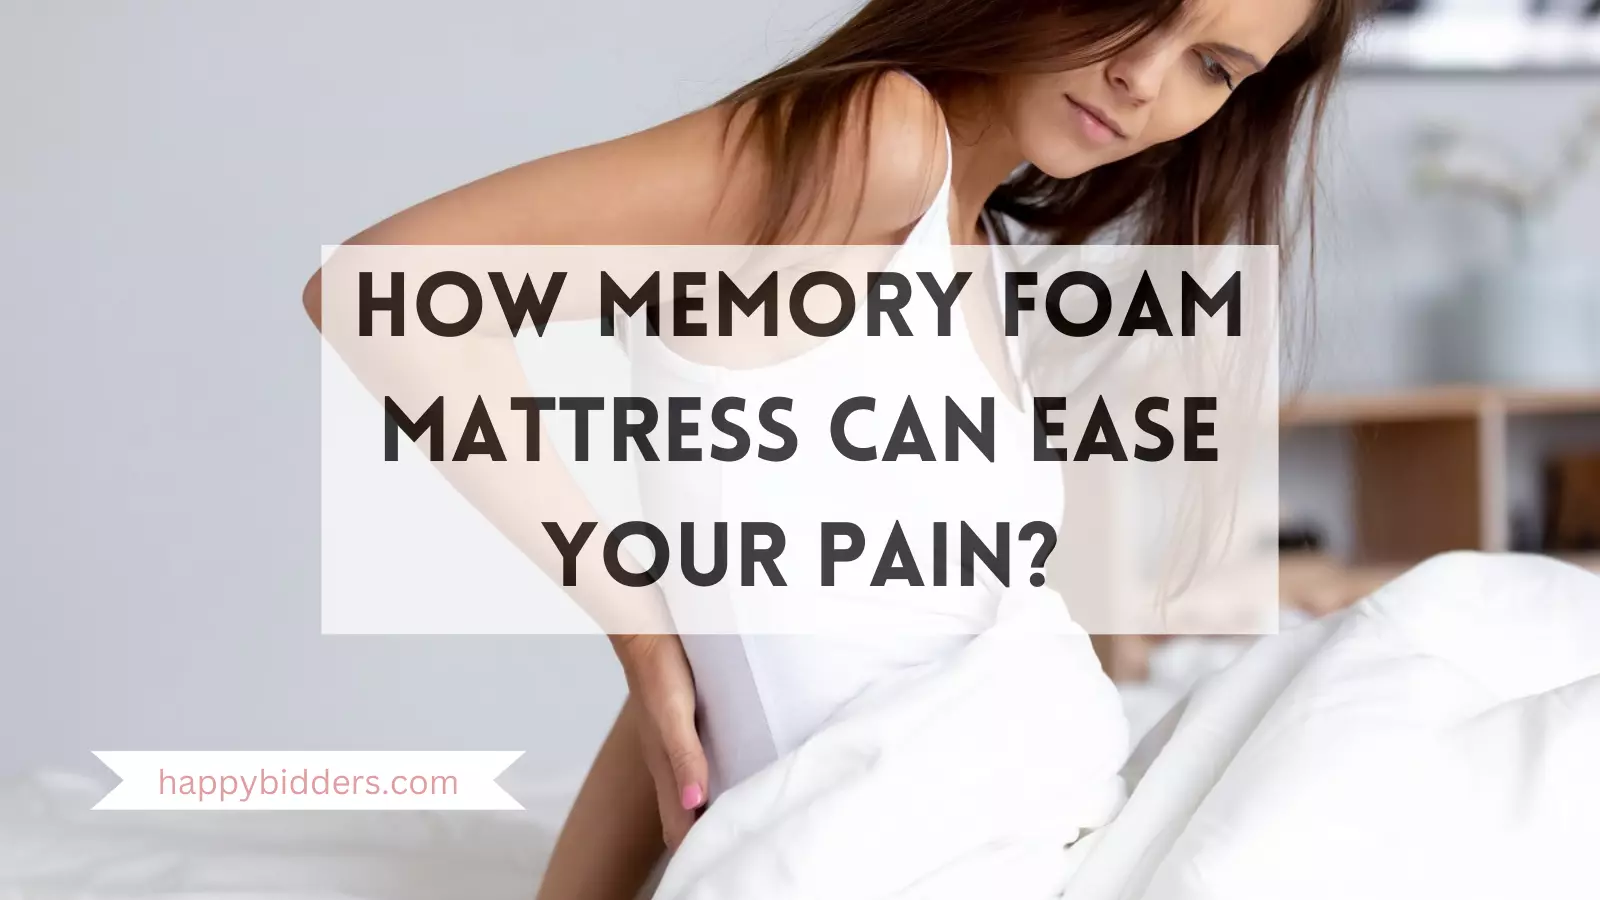 How memory foam mattress Can Ease Your Pain?